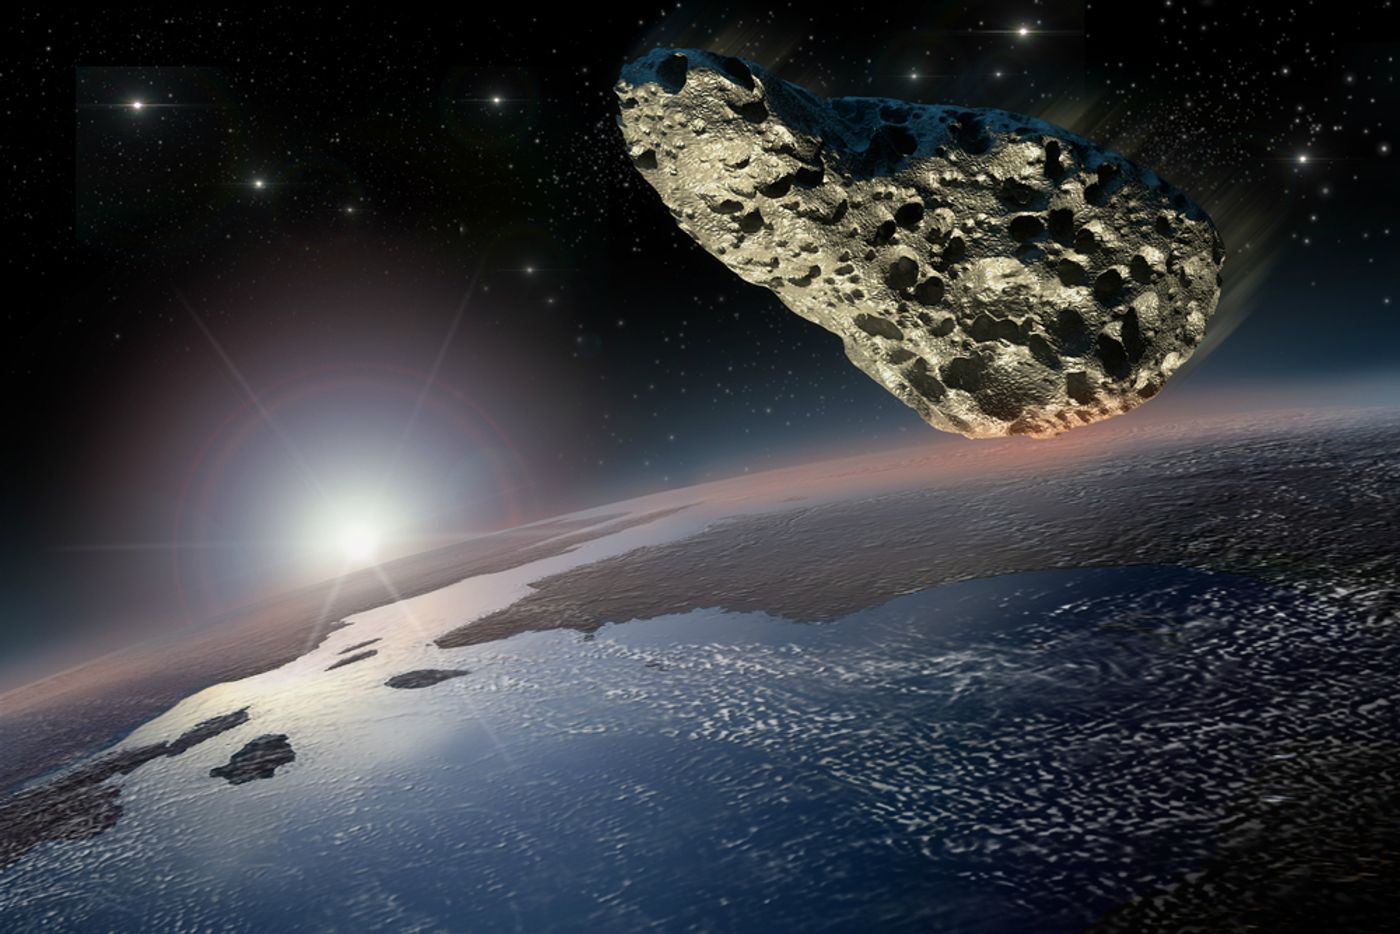 A branch of previously-unseen Taurid space rocks pose a potential threat to the Earth.